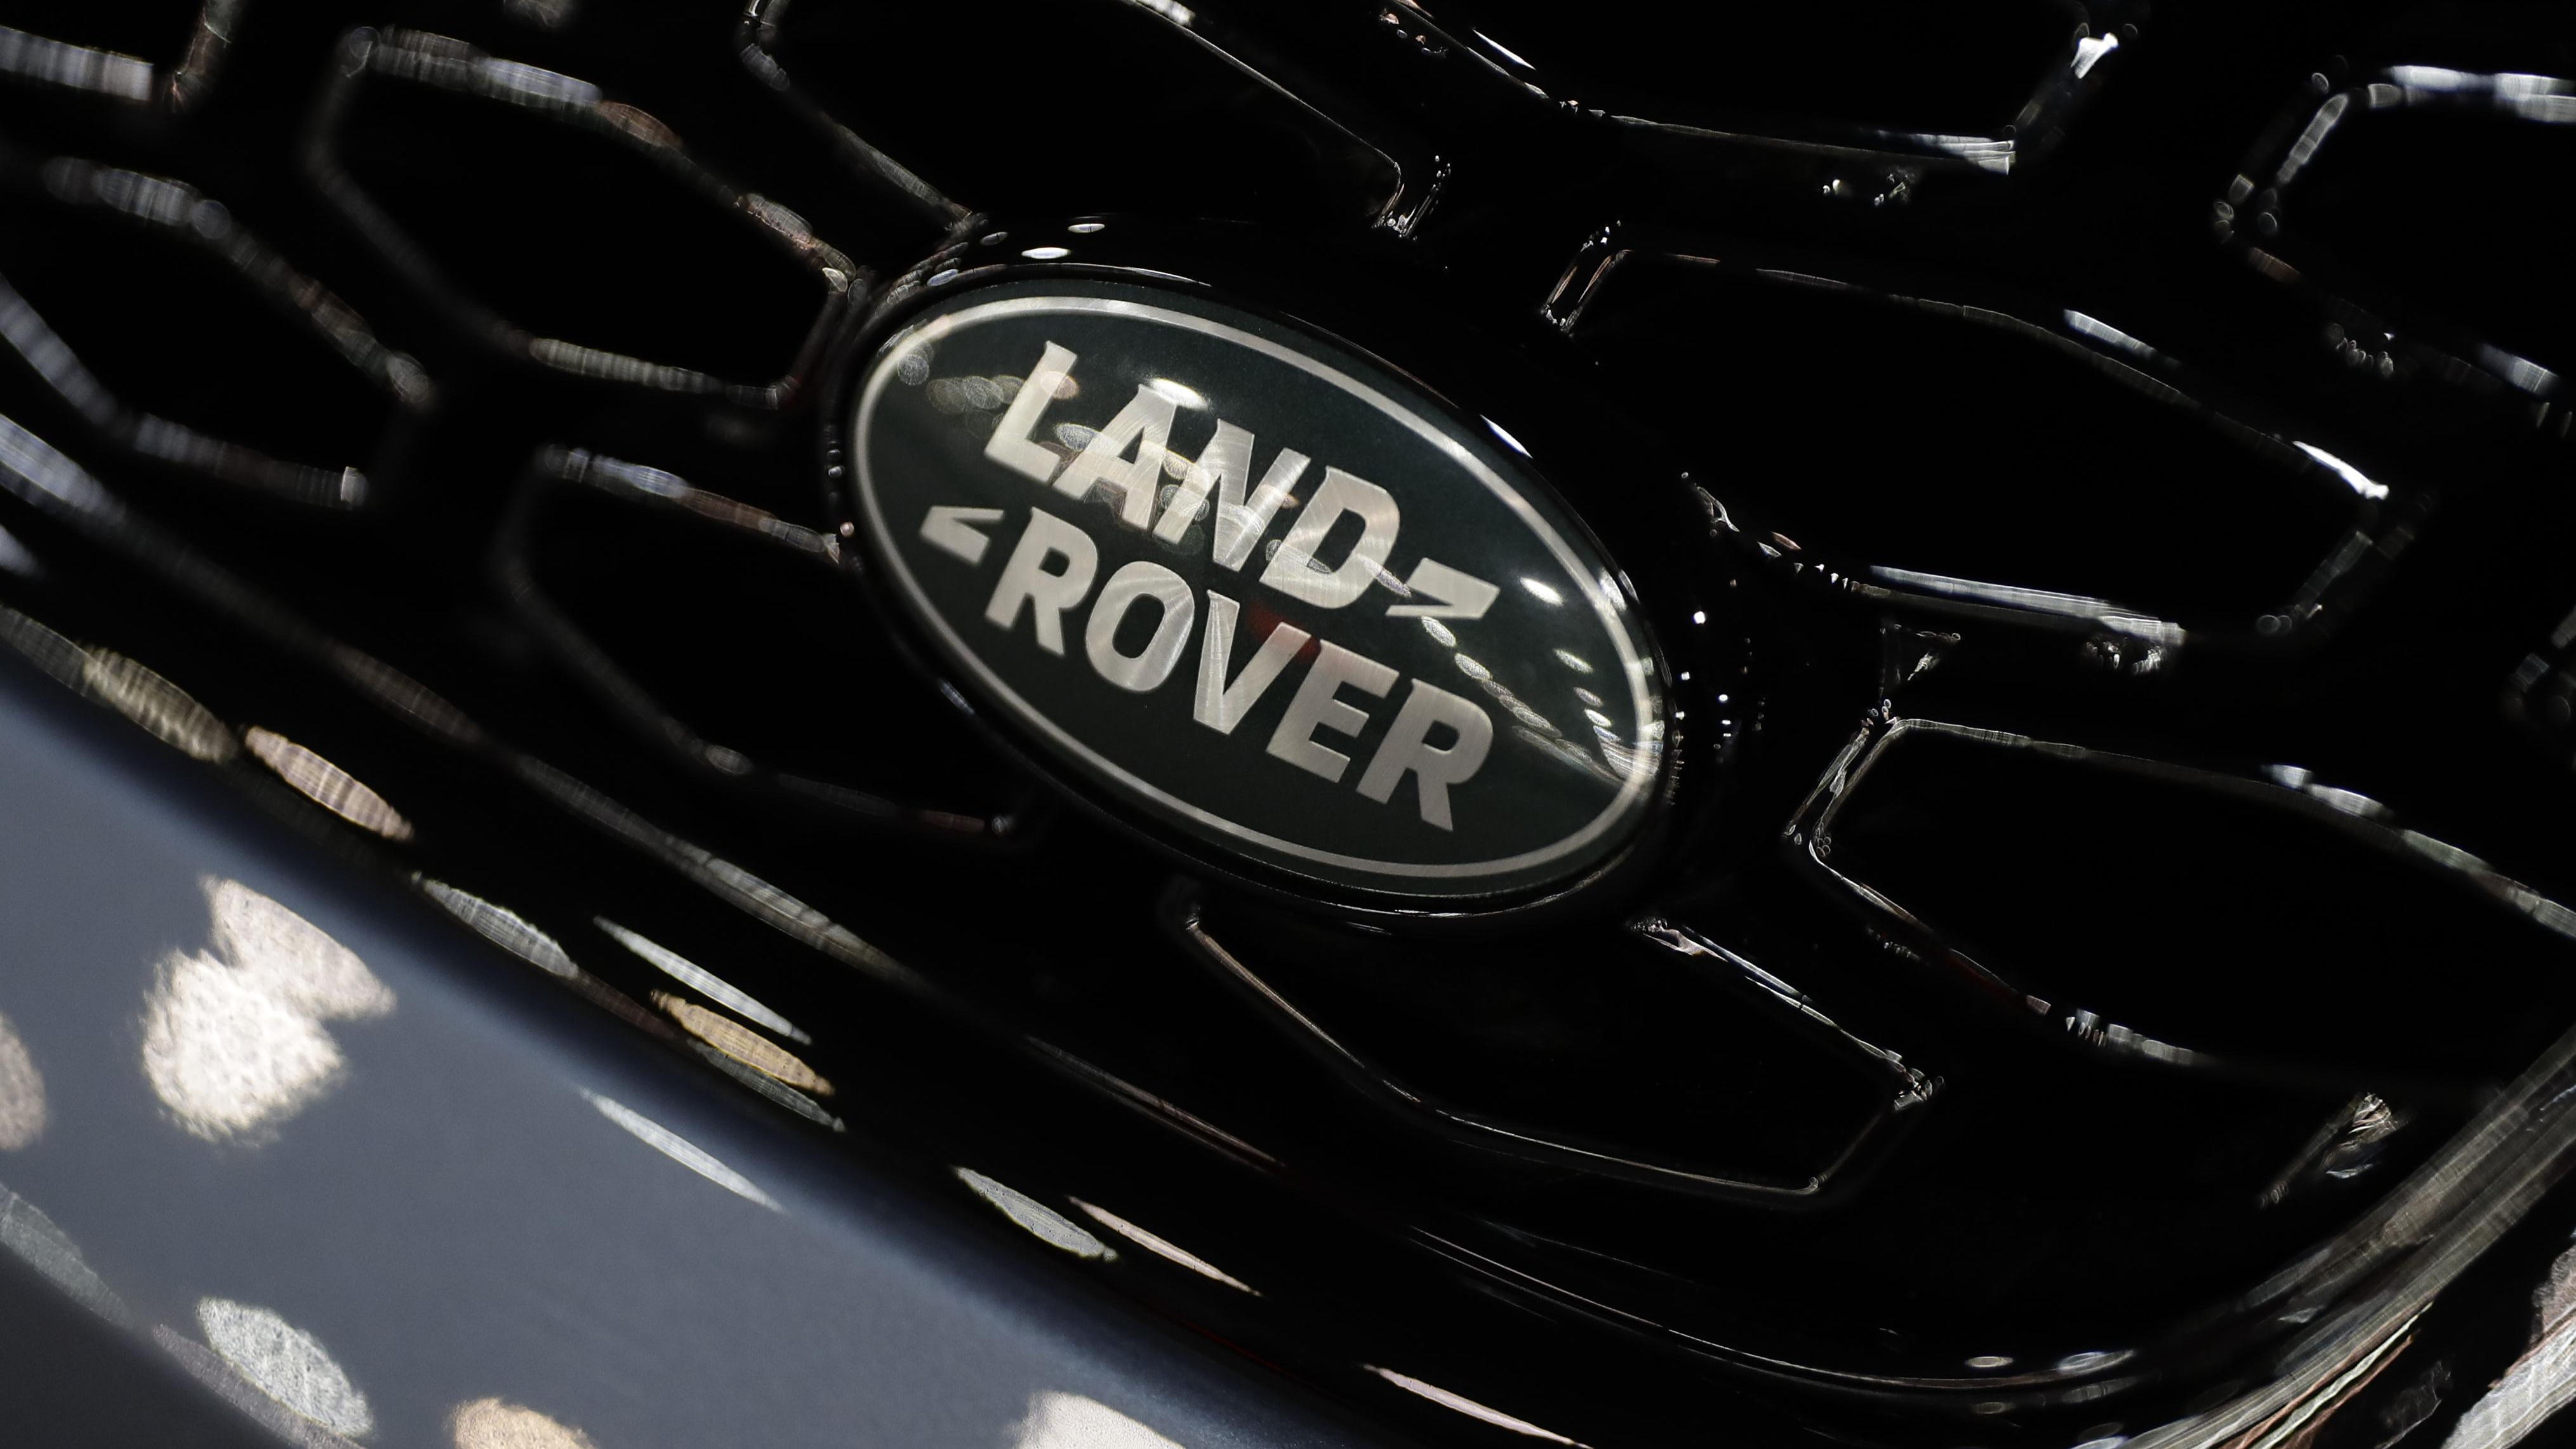 Sales of Jaguar sports cars and Land Rover SUVs dropped 35 percent in the world’s biggest auto market in the nine months to Dec. 31.